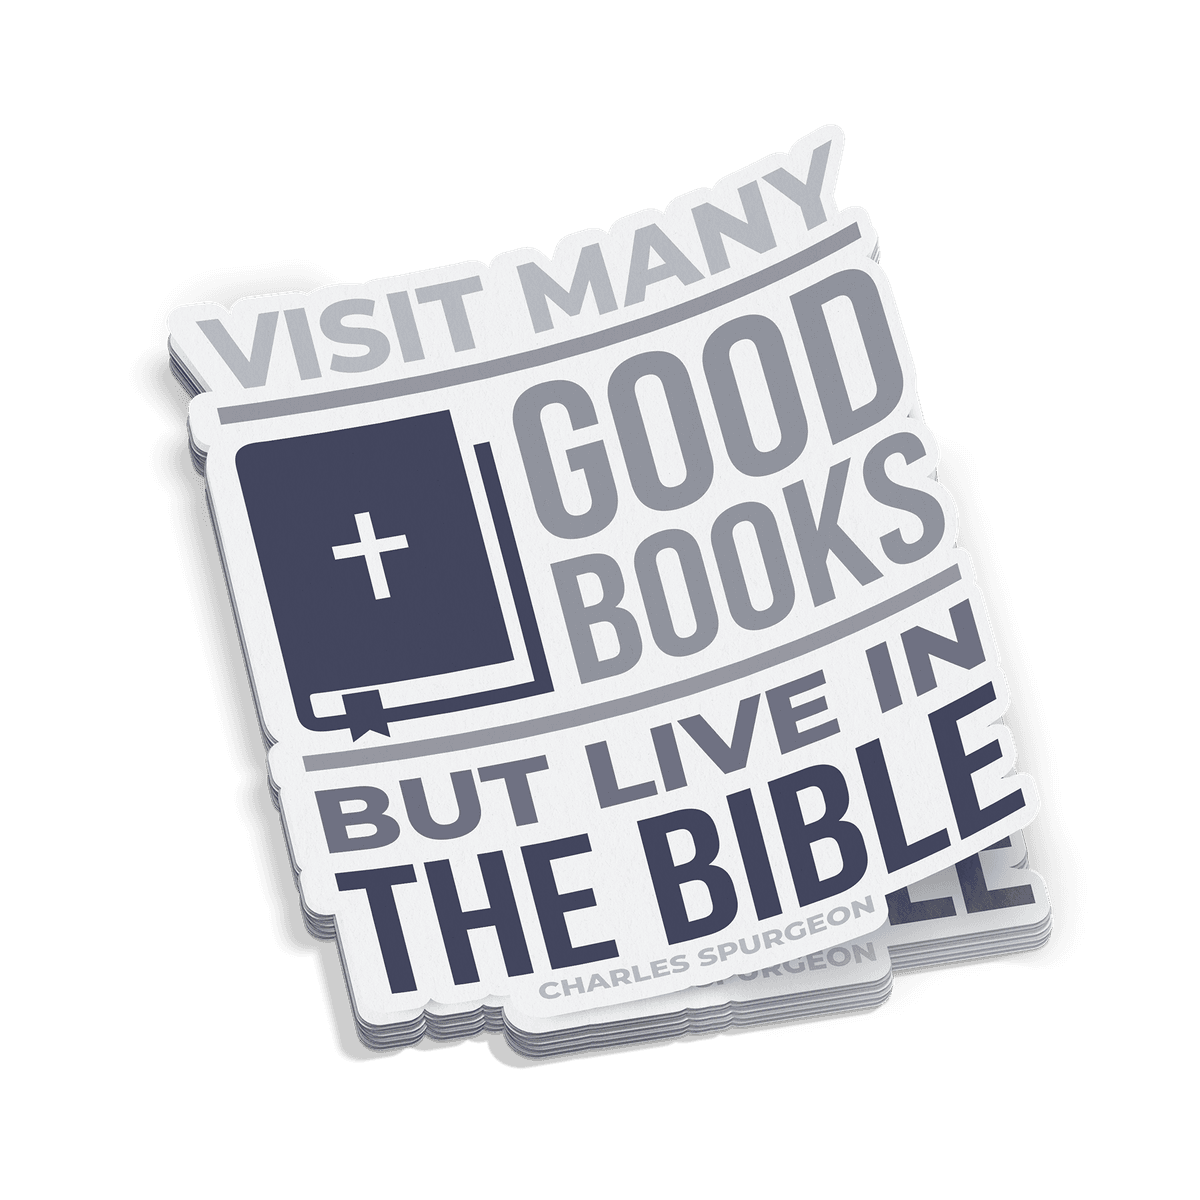 Live In The Bible Sticker